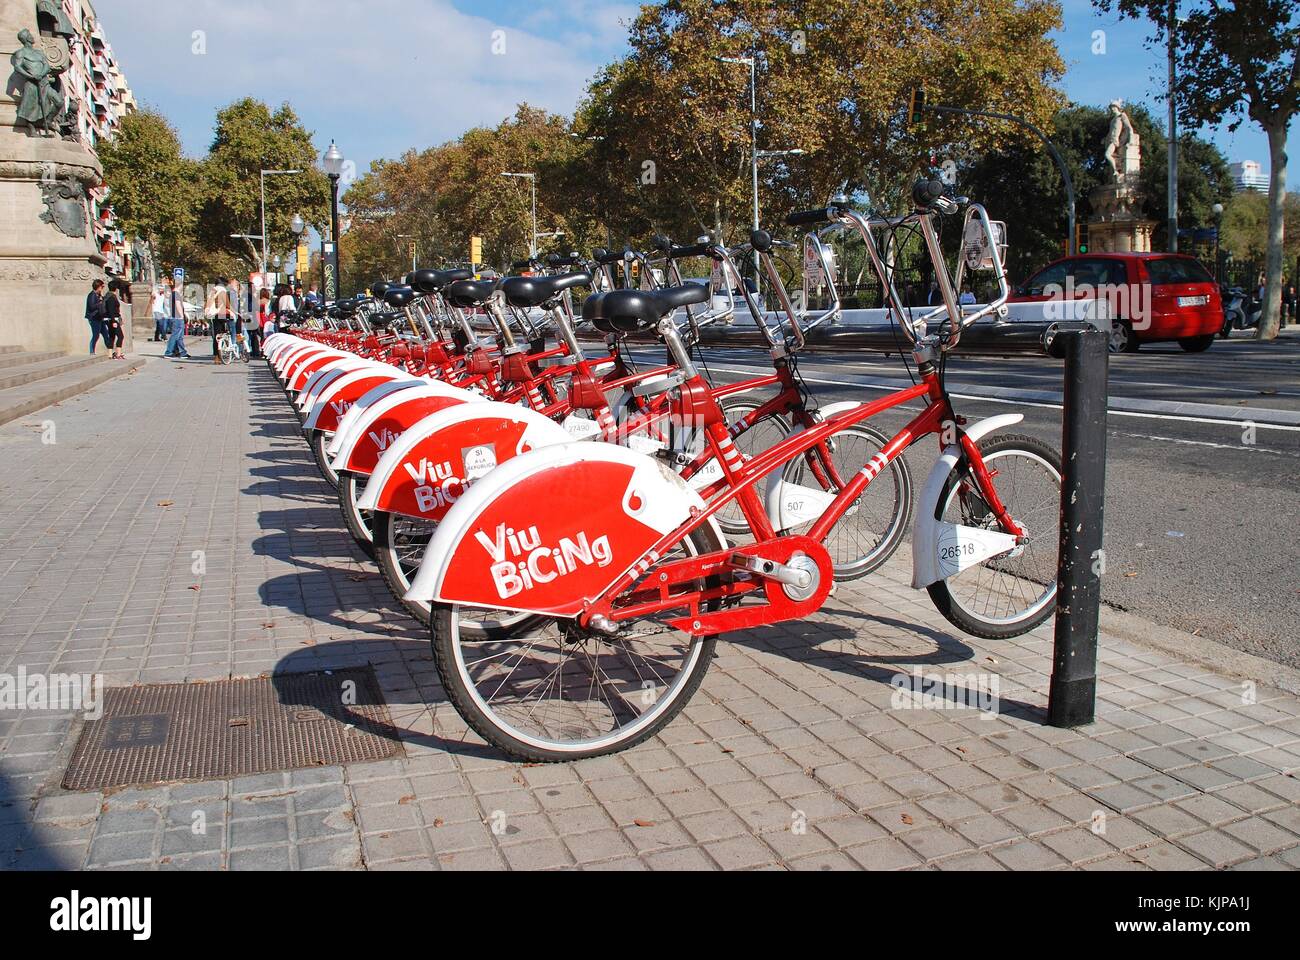 A row of bicycles on a Viu Bicing station in Barcelona, Spain on November 1, 2017. The cycle sharing scheme was started by the City council in 2007. Stock Photo